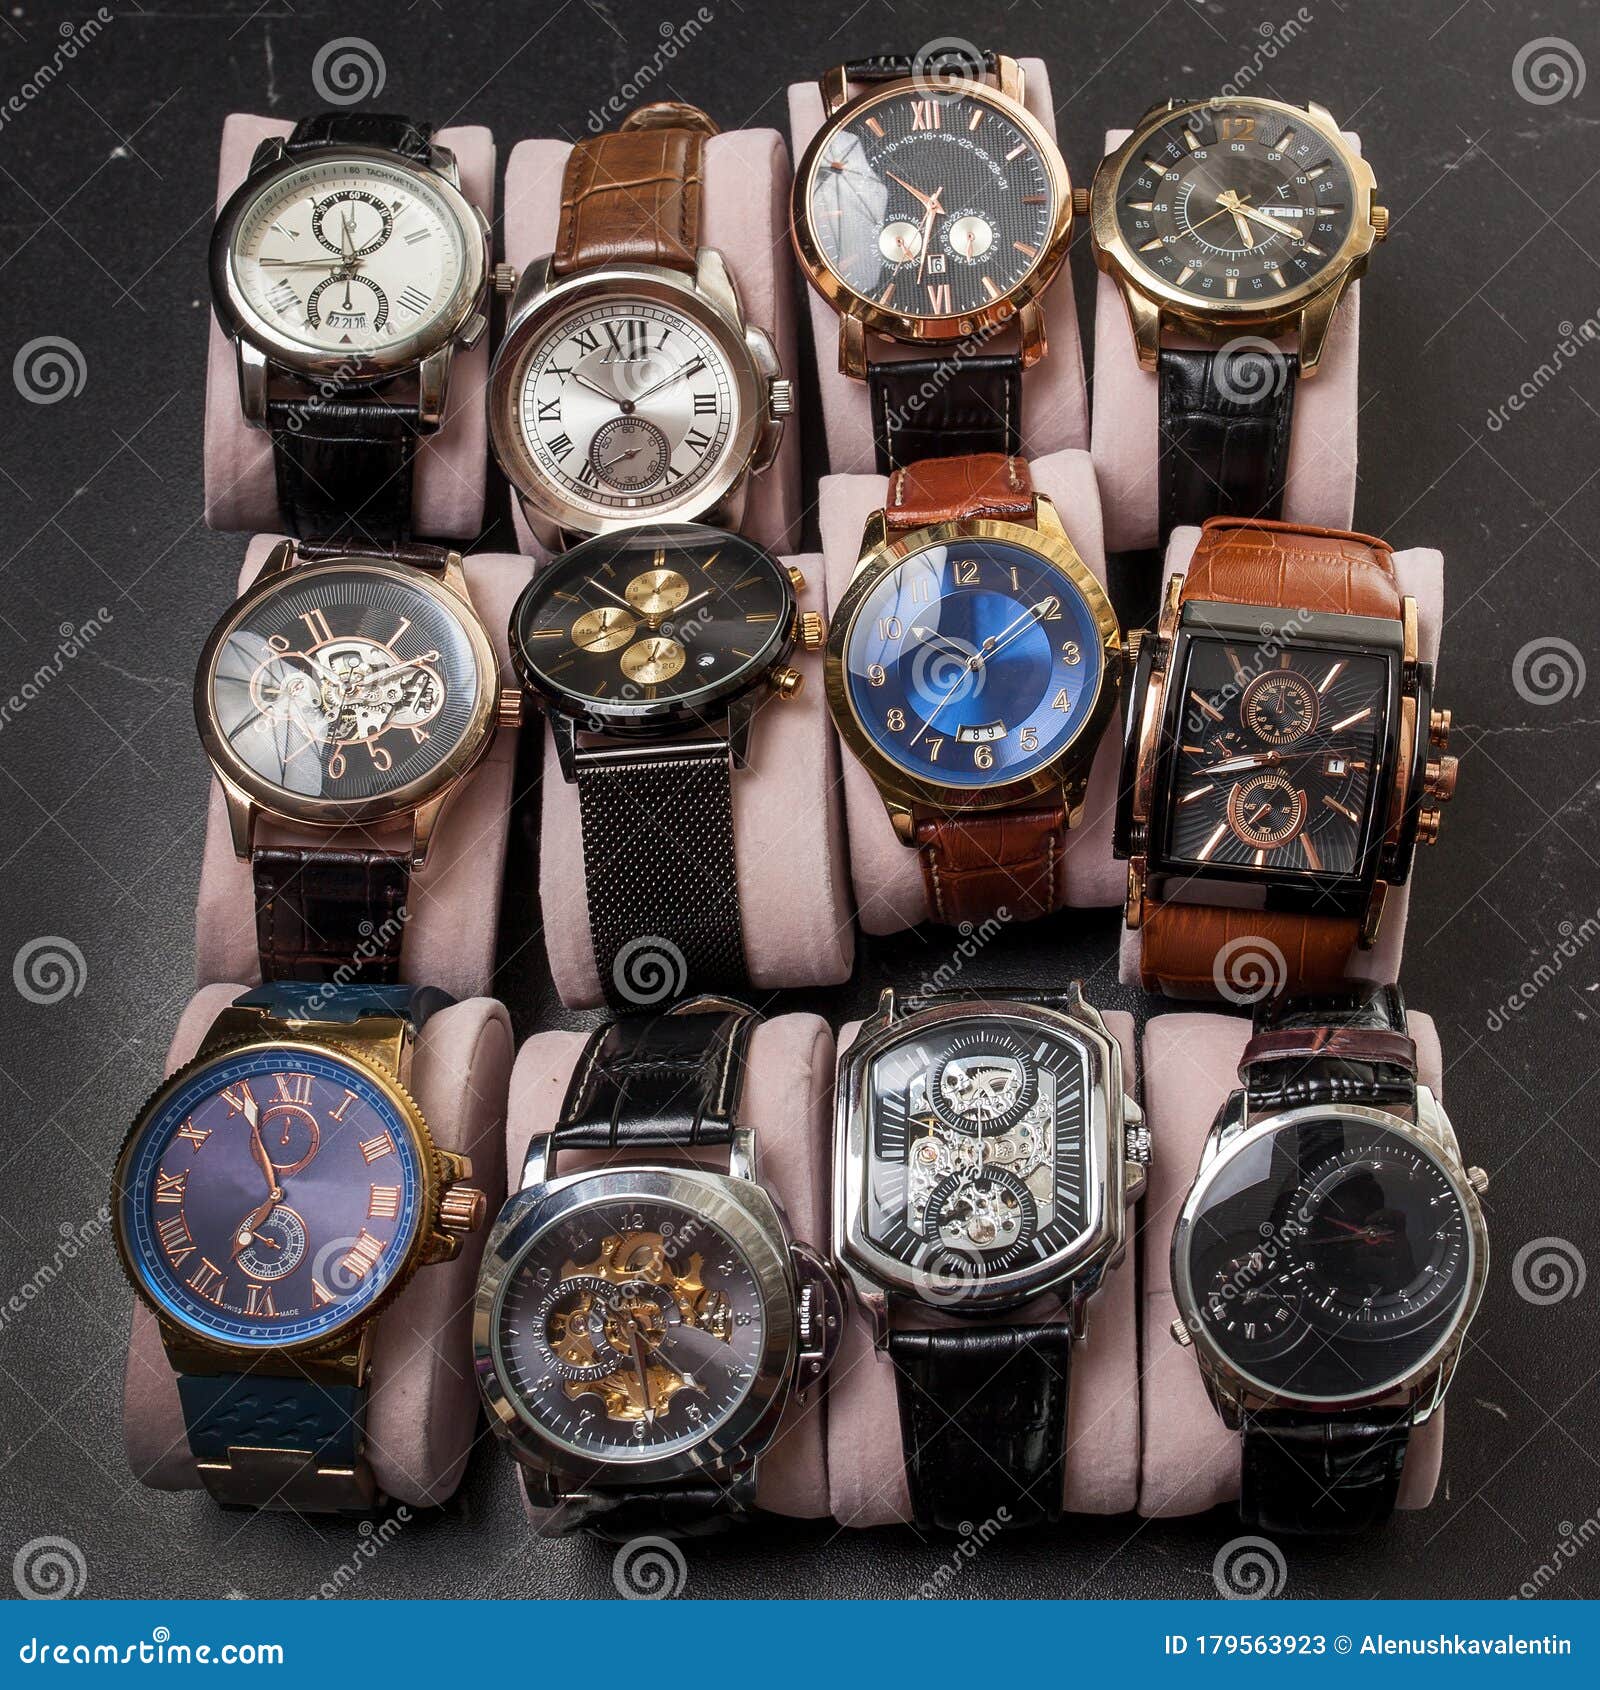 Storage Box with Collection of Men Wrist Watches Stock Image - Image of  fashion, present: 179563923